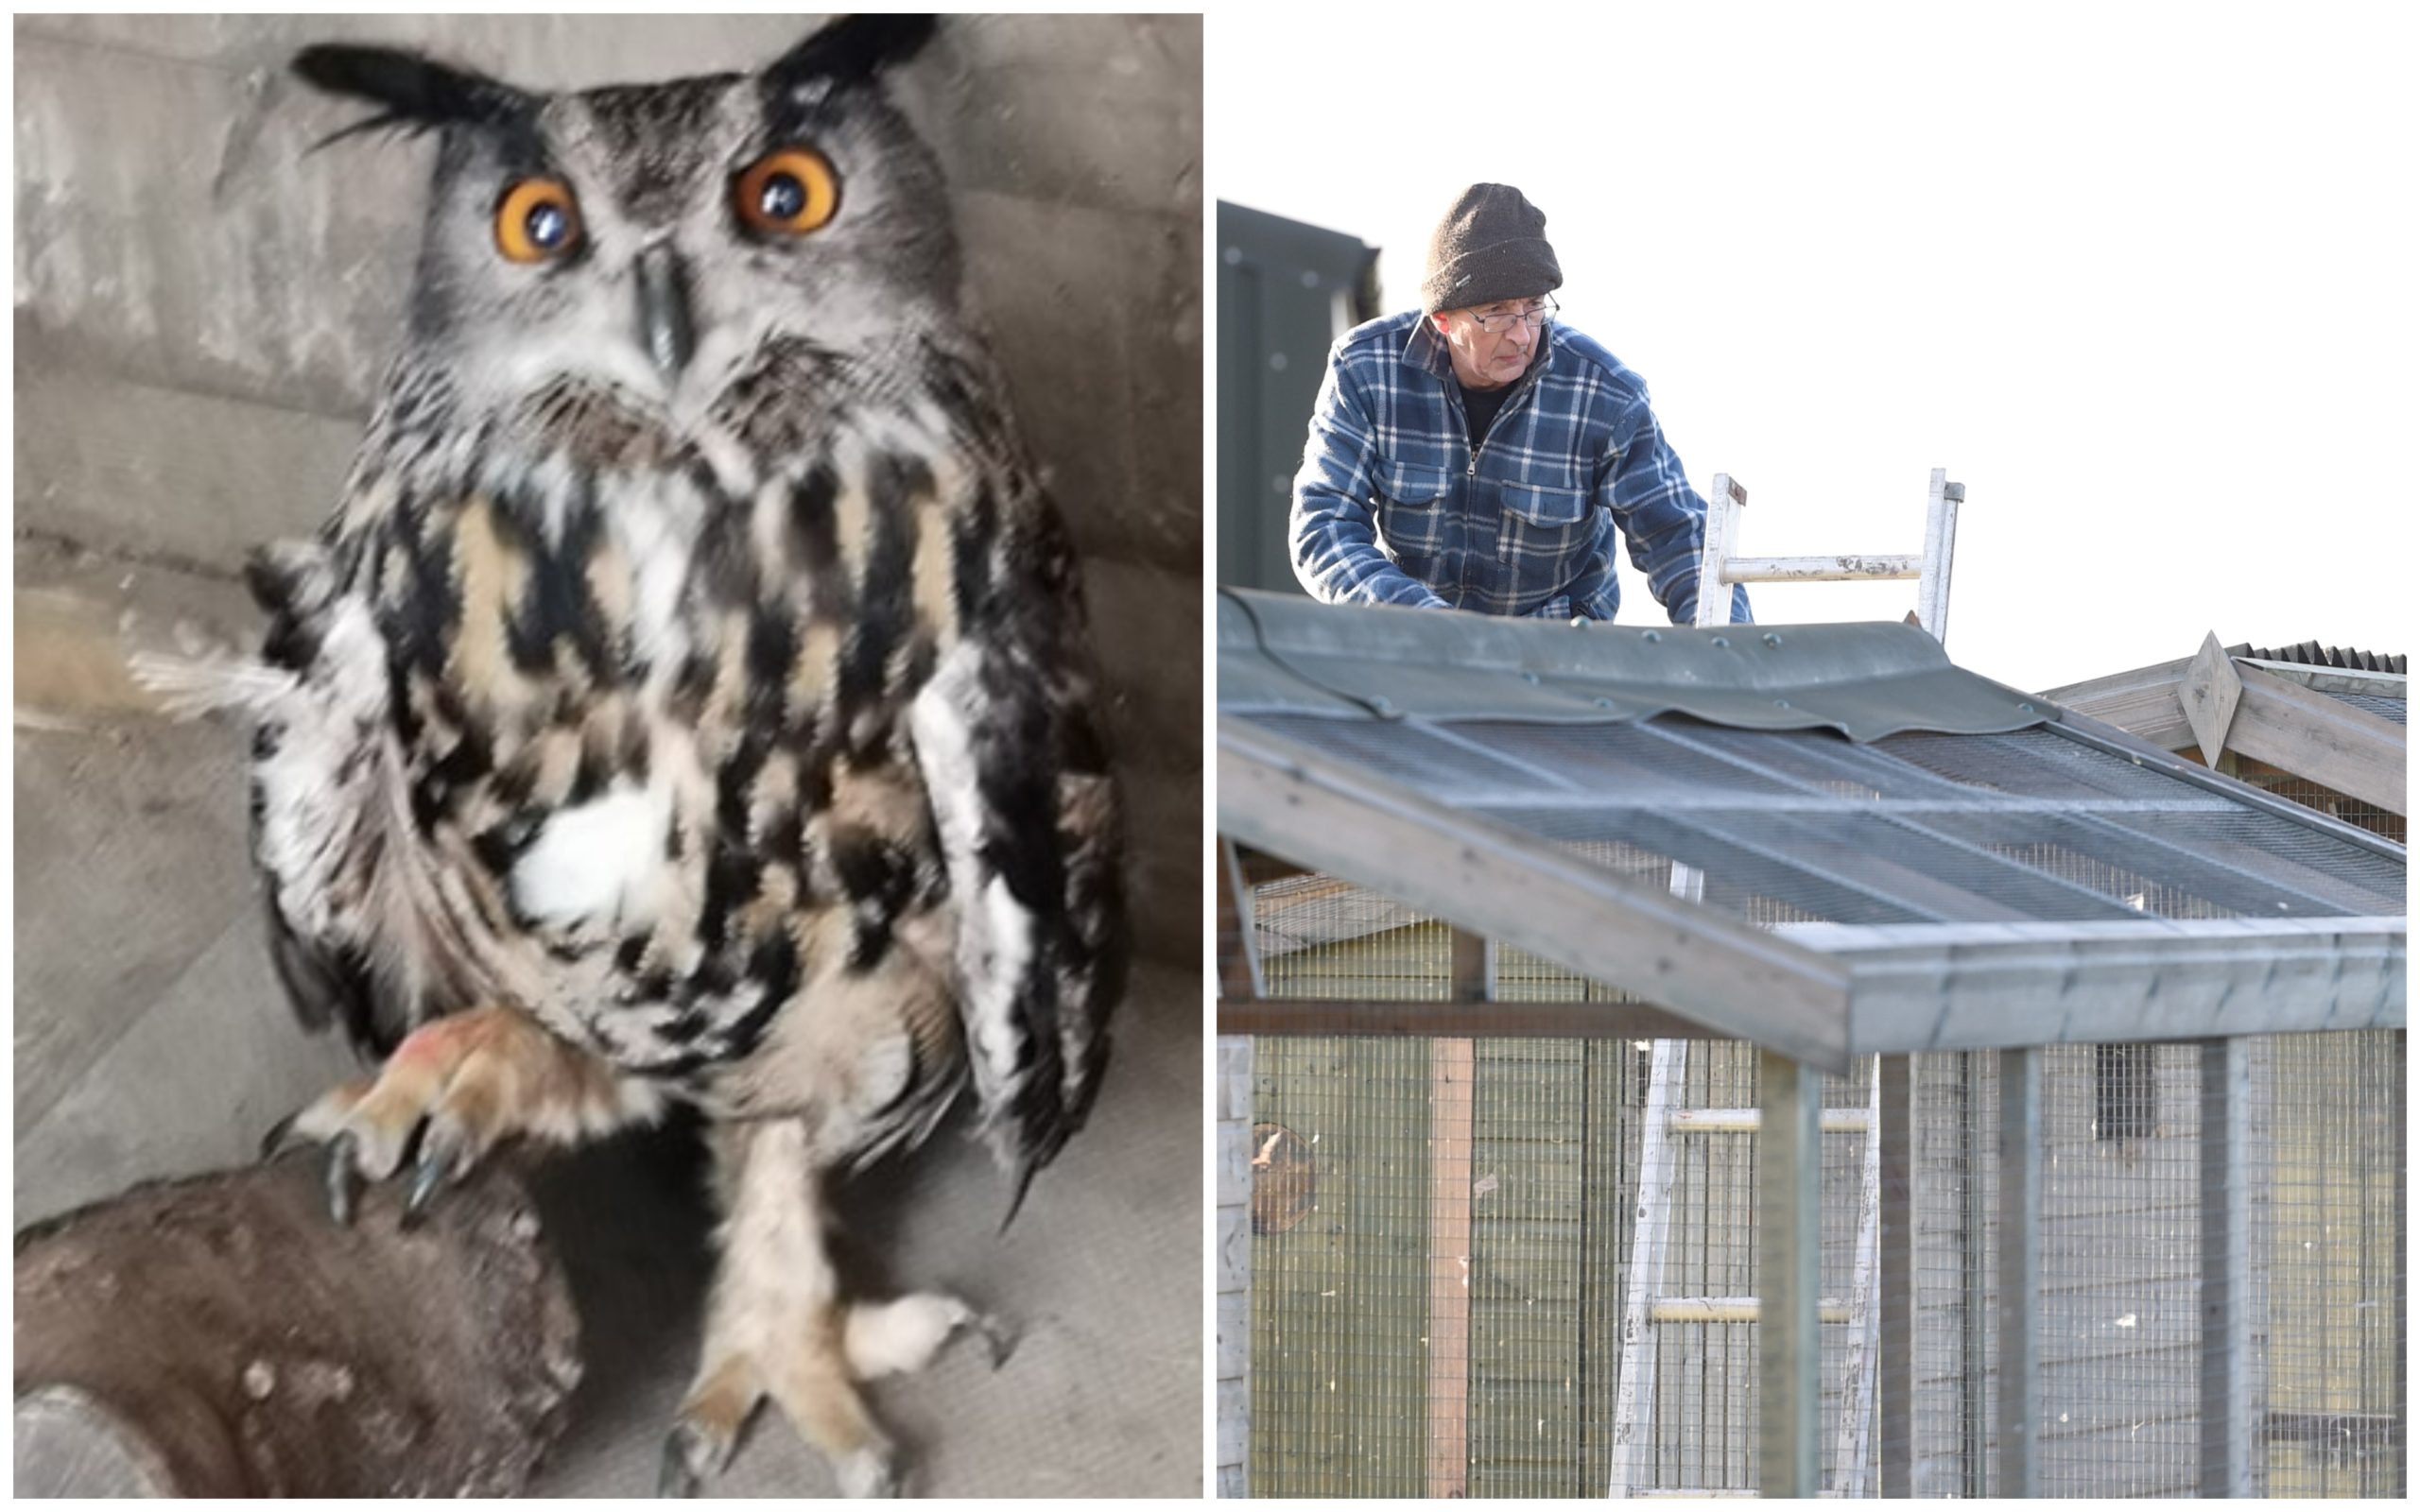 'Cooky' the eagle owl is recovering at the New Arc animal rescue centre (right).